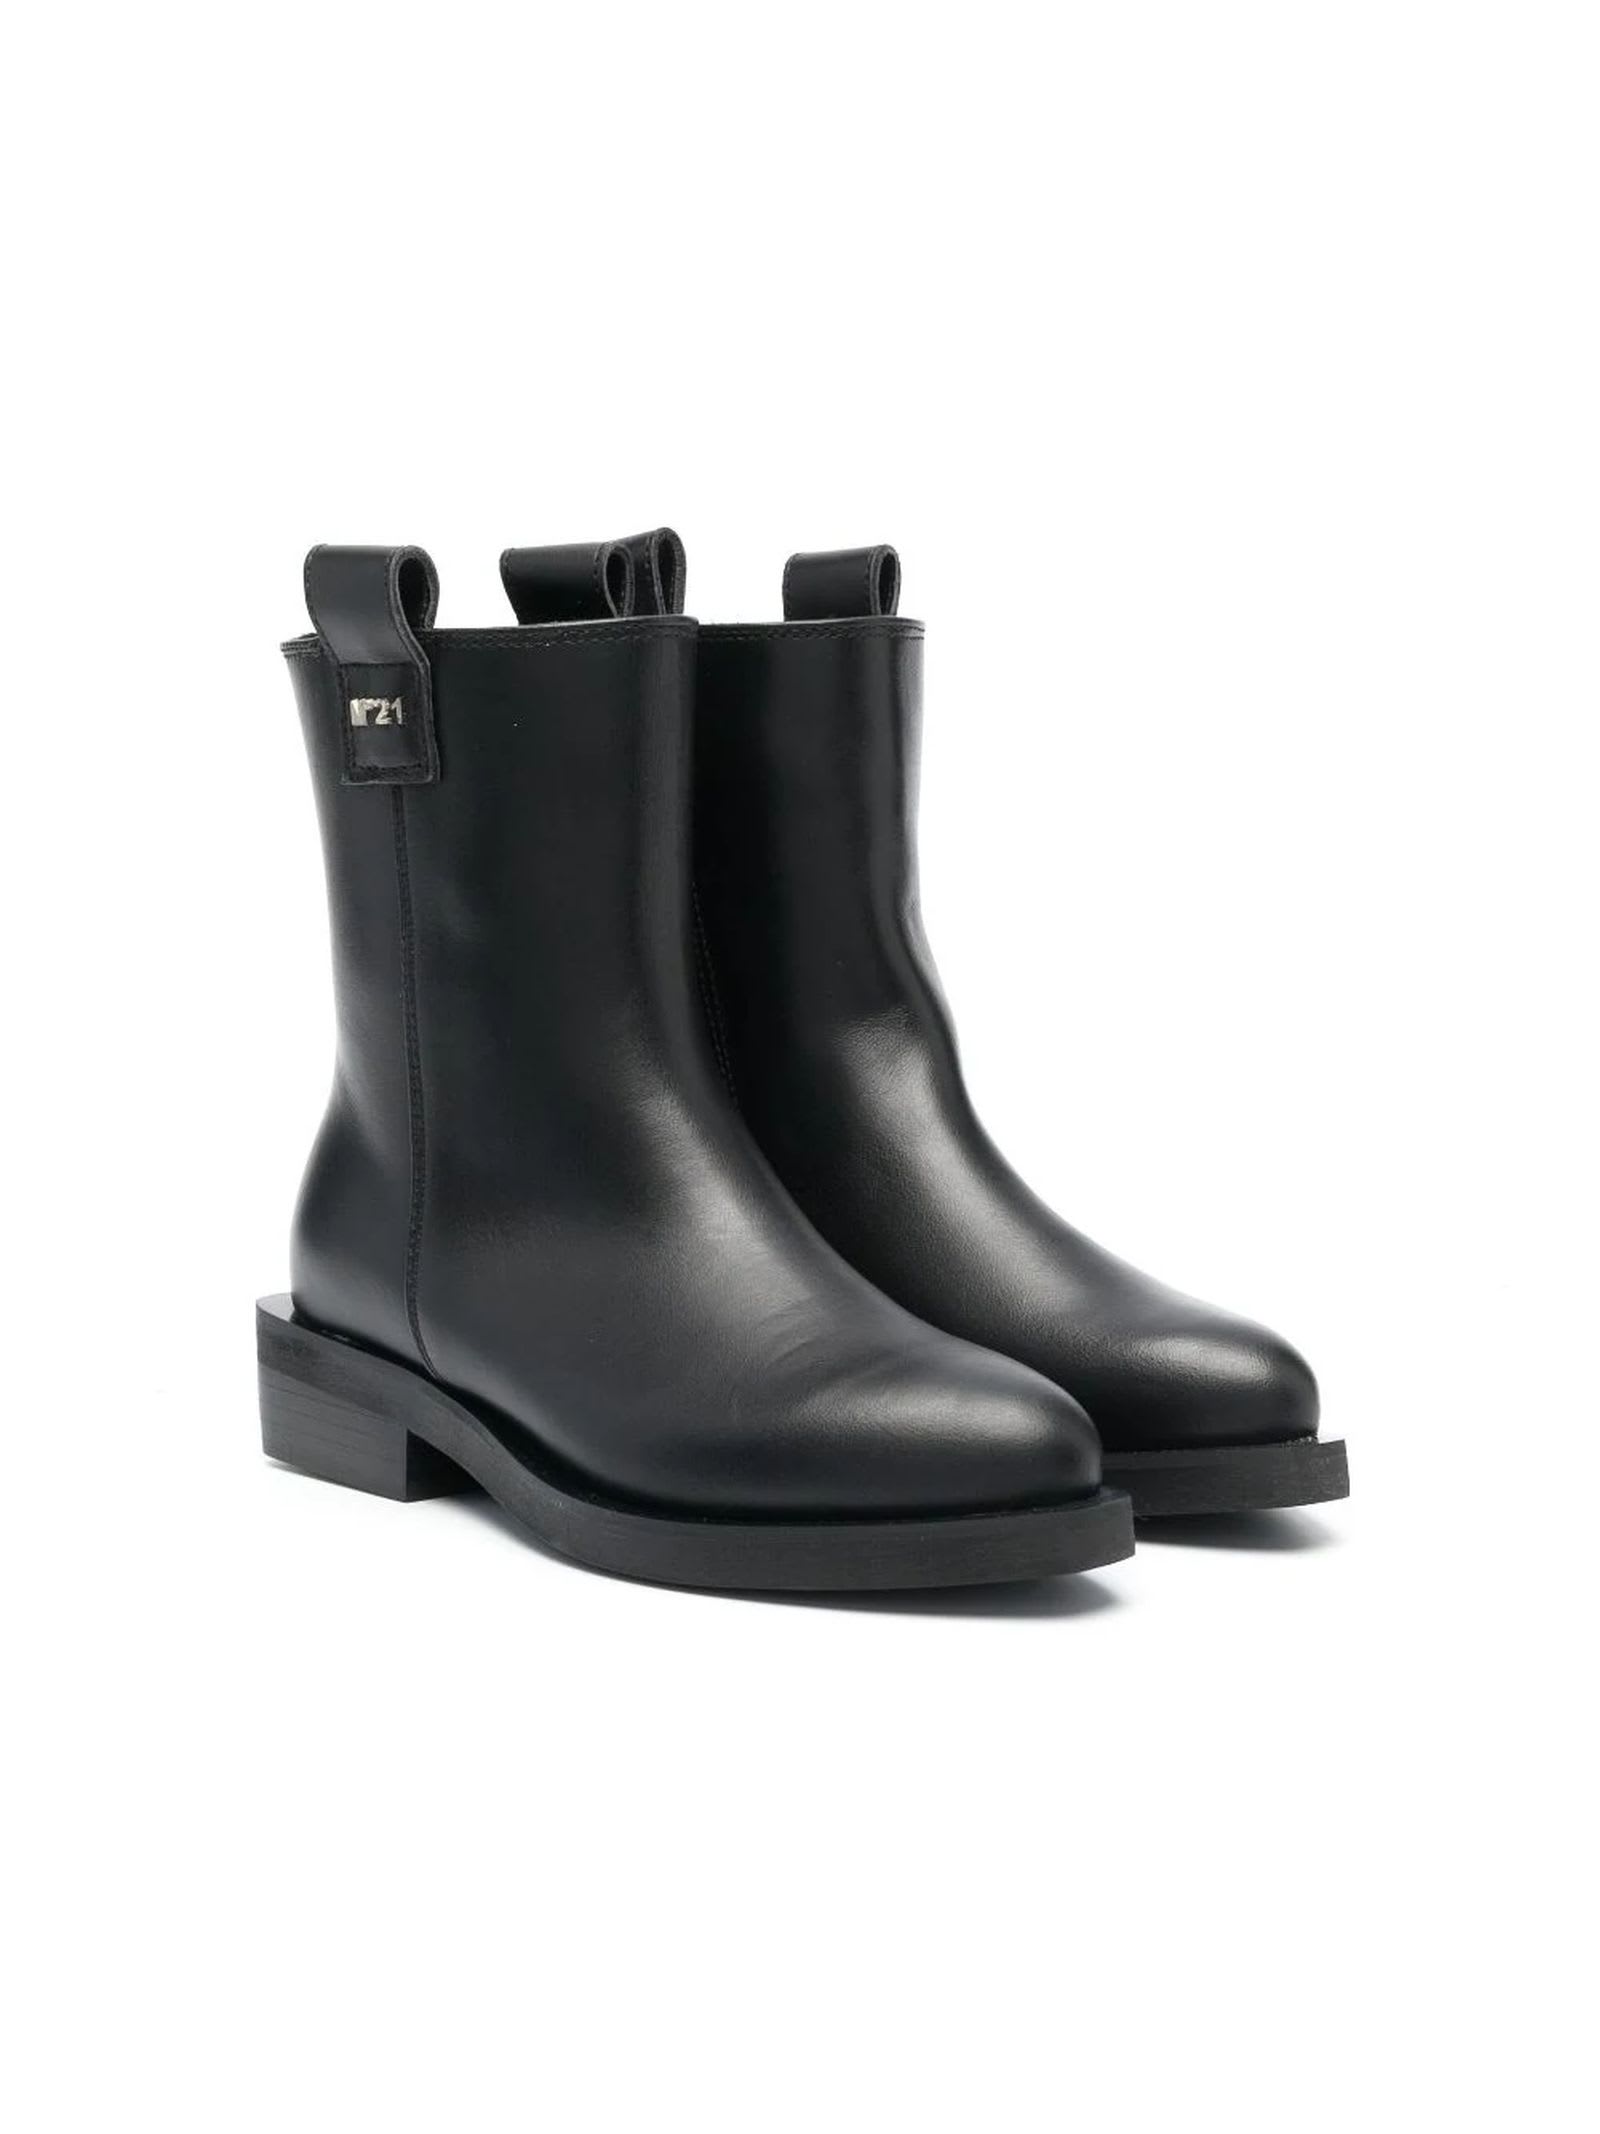 N°21 BLACK LEATHER ANKLE BOOTS